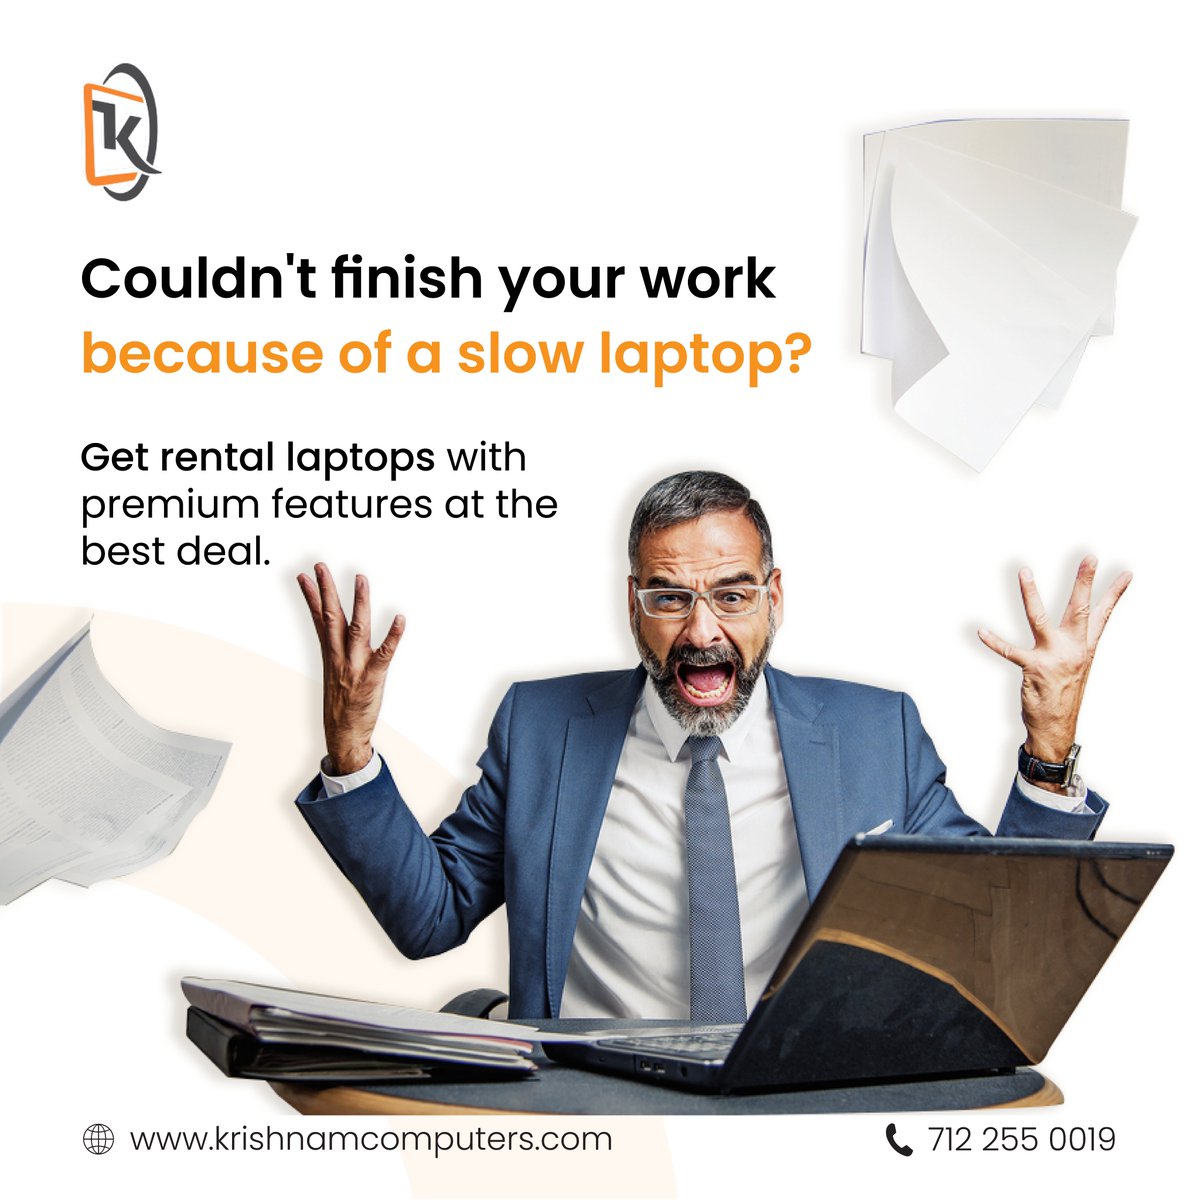 Upgrade your laptop, upgrade your productivity.💻😇 Call us for the best deals on rental laptops💯✅
.
.
.
#laptop #instadaily #technology #technolover #face #frustrated #repair #system #gaminglaptop #servicelaptop #computers #desktop #gamer #screen  #gadgets #techie #datacenter